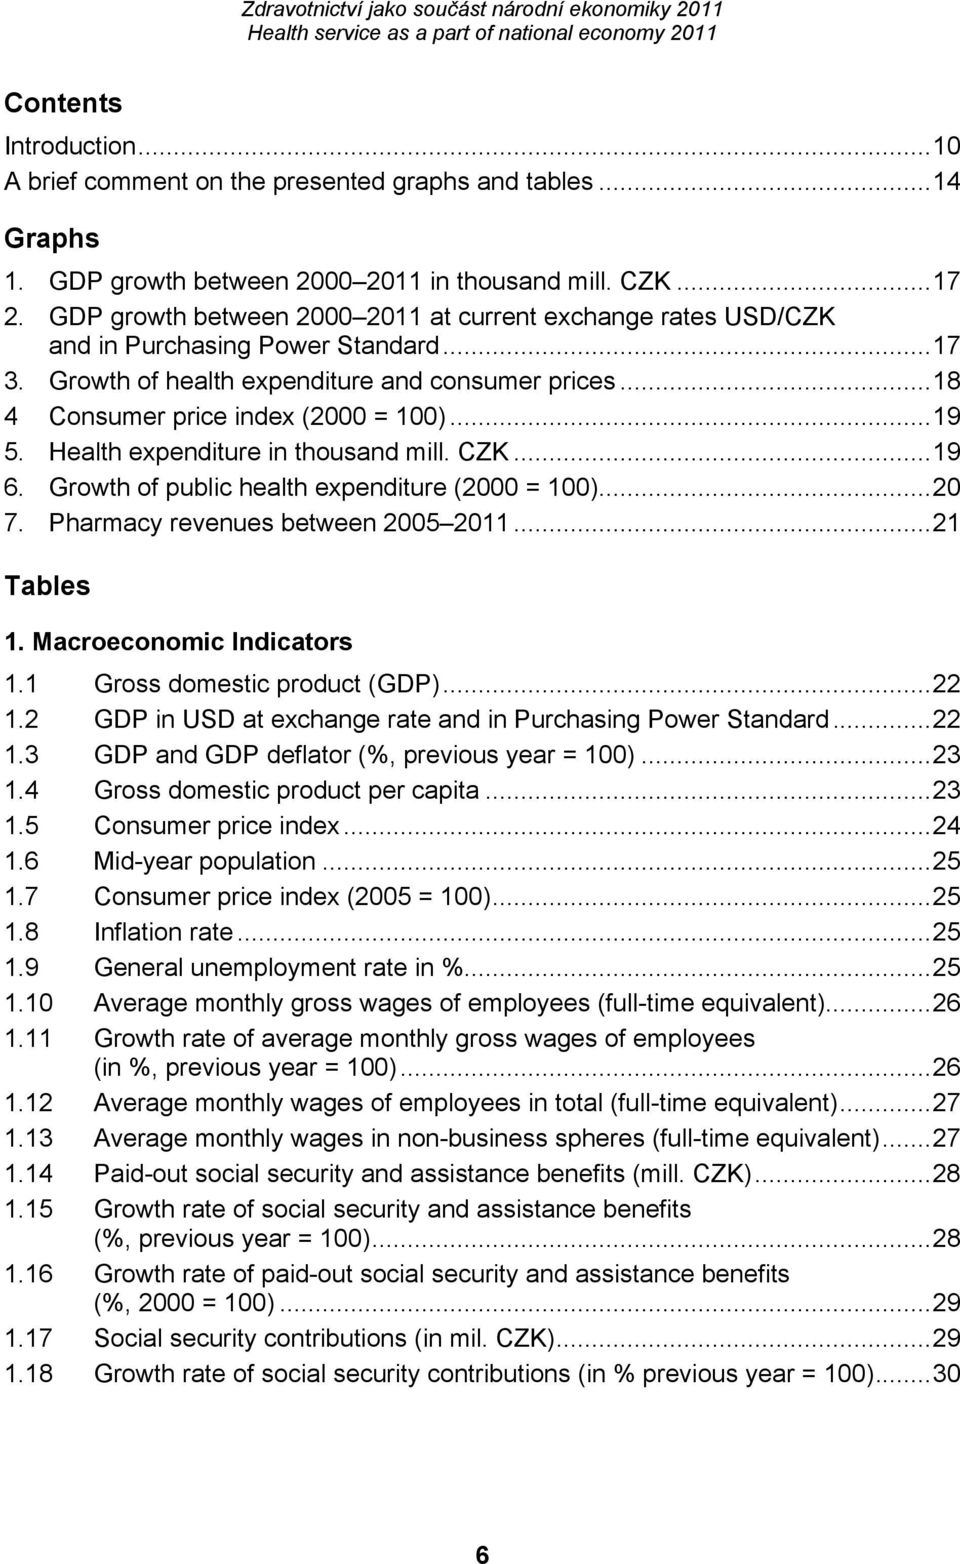 Health expenditure in thousand mill. CZK...19 6. Growth of public health expenditure (2000 = 100)...20 7. Pharmacy revenues between 2005 2011...21 Tables 1. Macroeconomic Indicators 1.